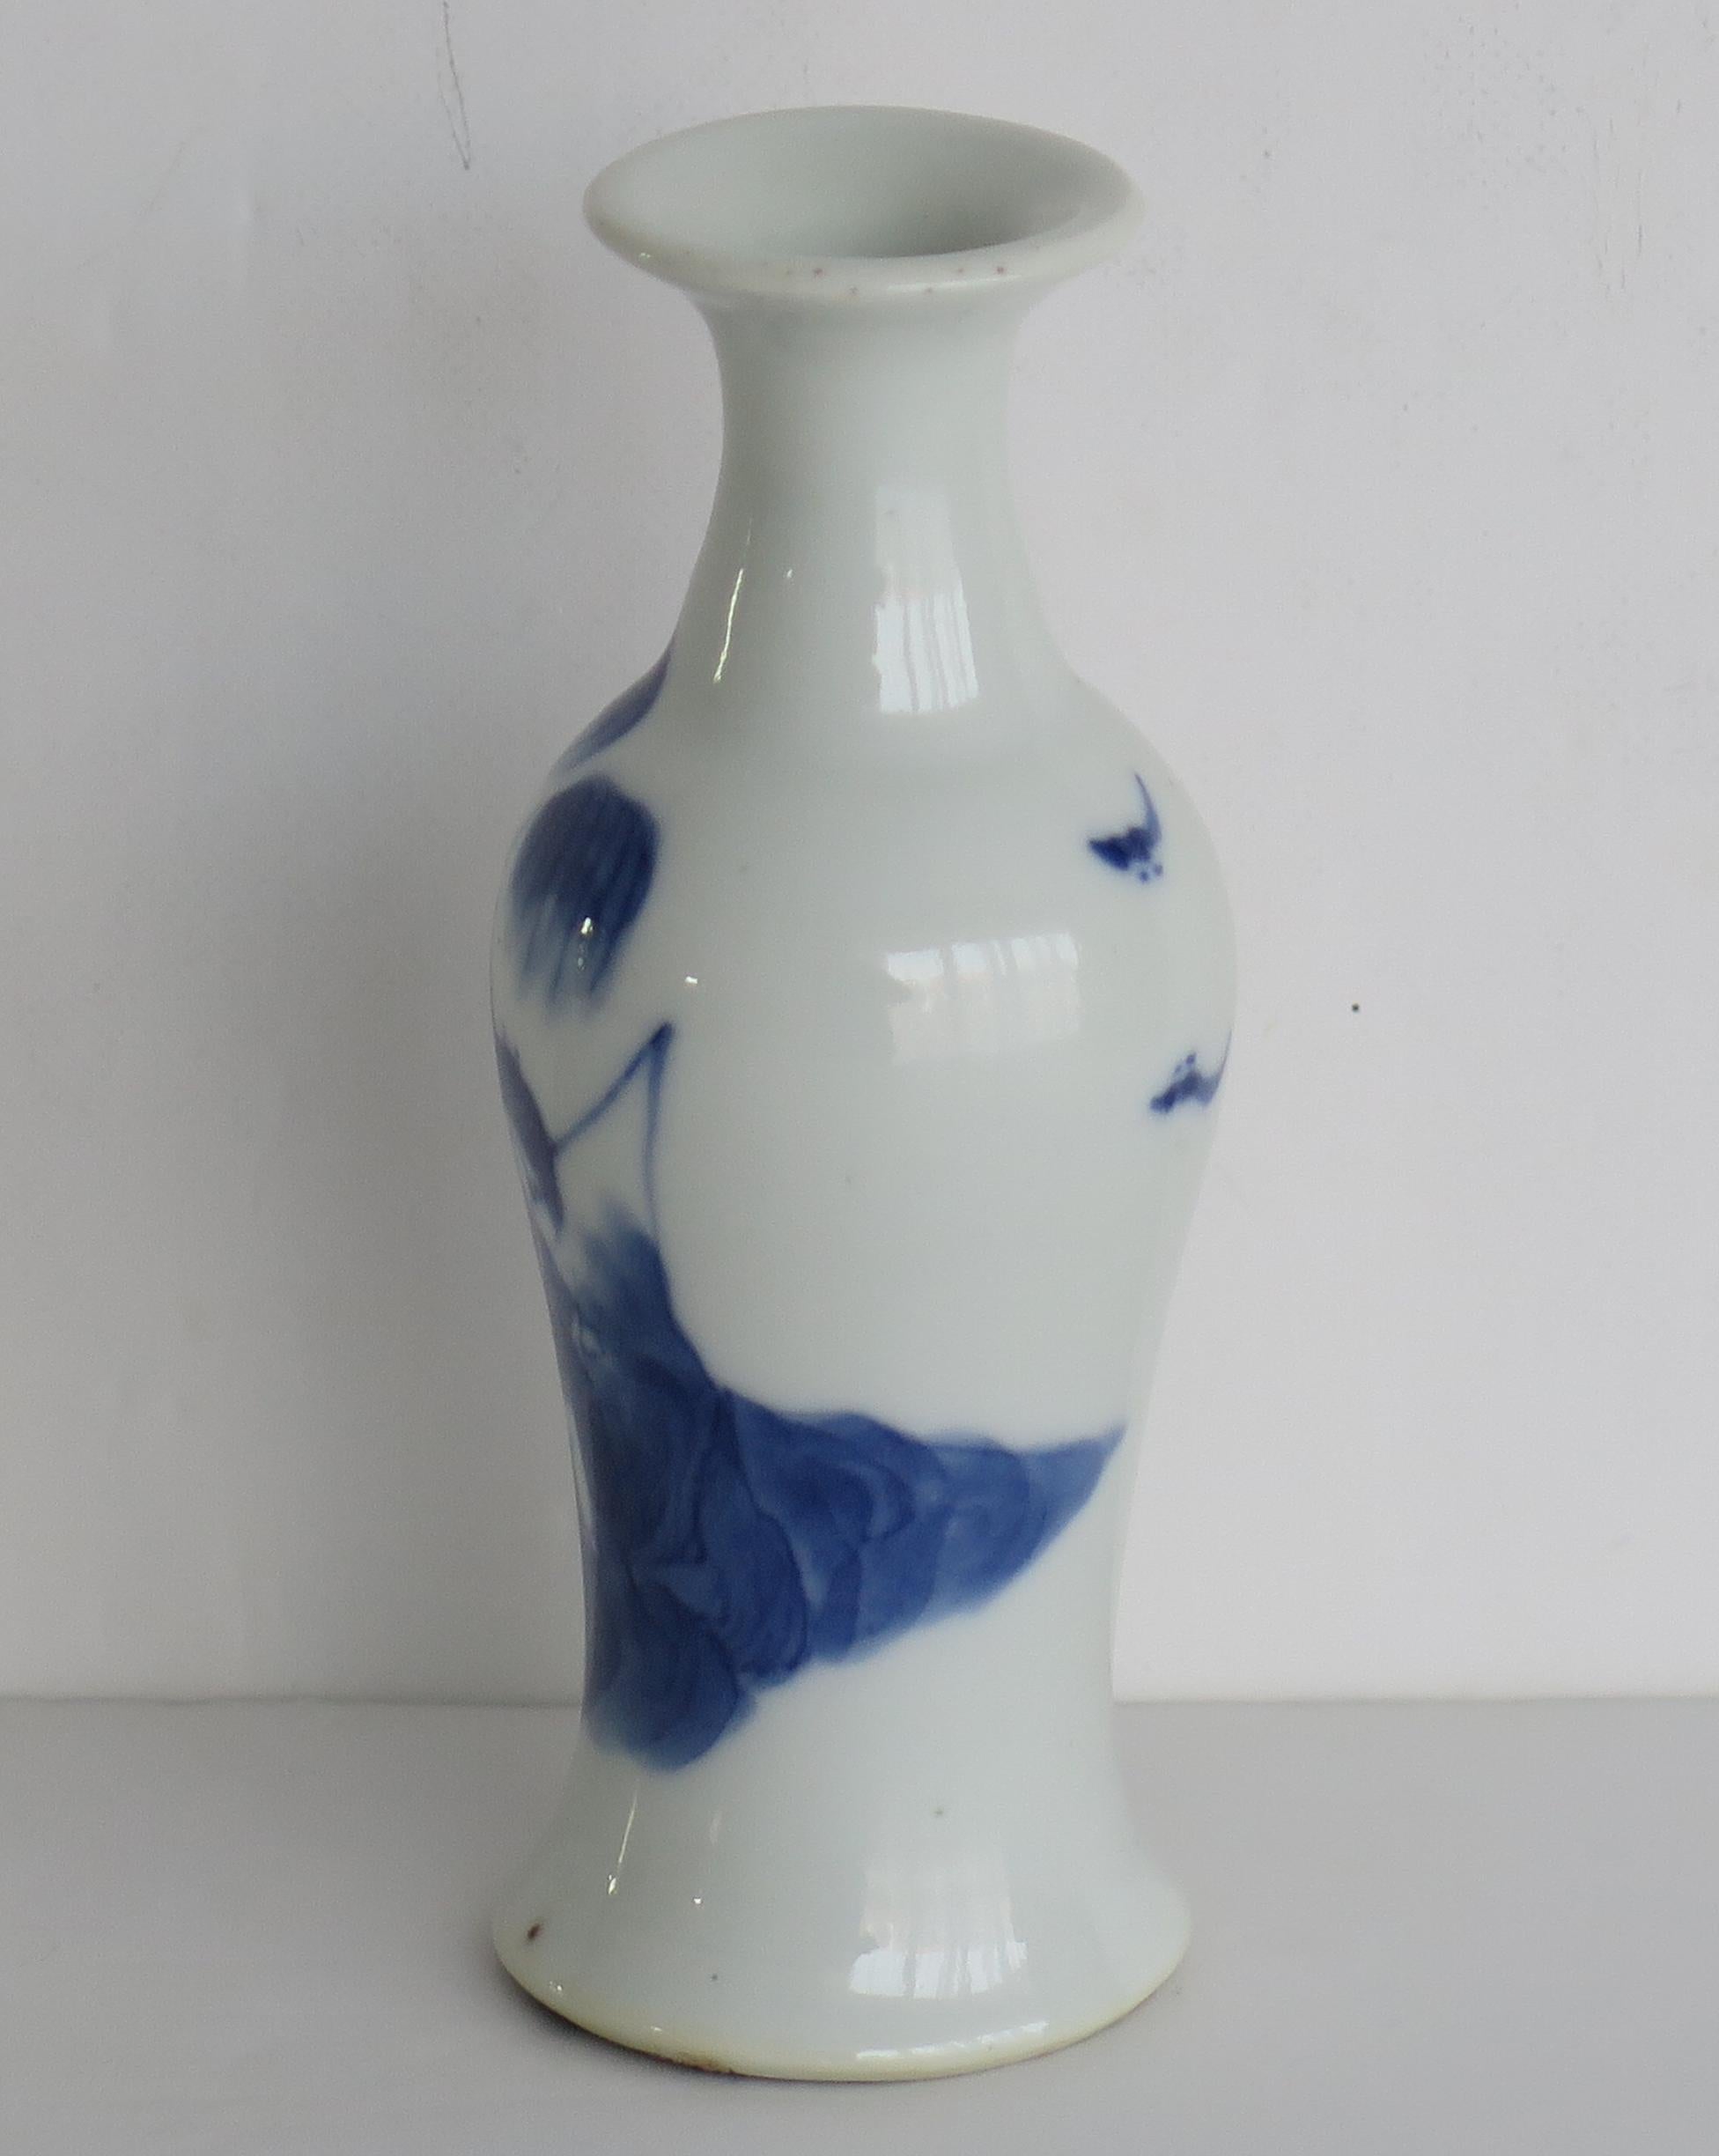 This is a hand painted 17th century, late Ming dynasty, porcelain Jar or small Vase which we attribute to the Hatcher shipwreck cargo, this piece being from the Wanli /transitional period, circa 1625- 1640. 

The Jar/ Vase is fairly thickly potted